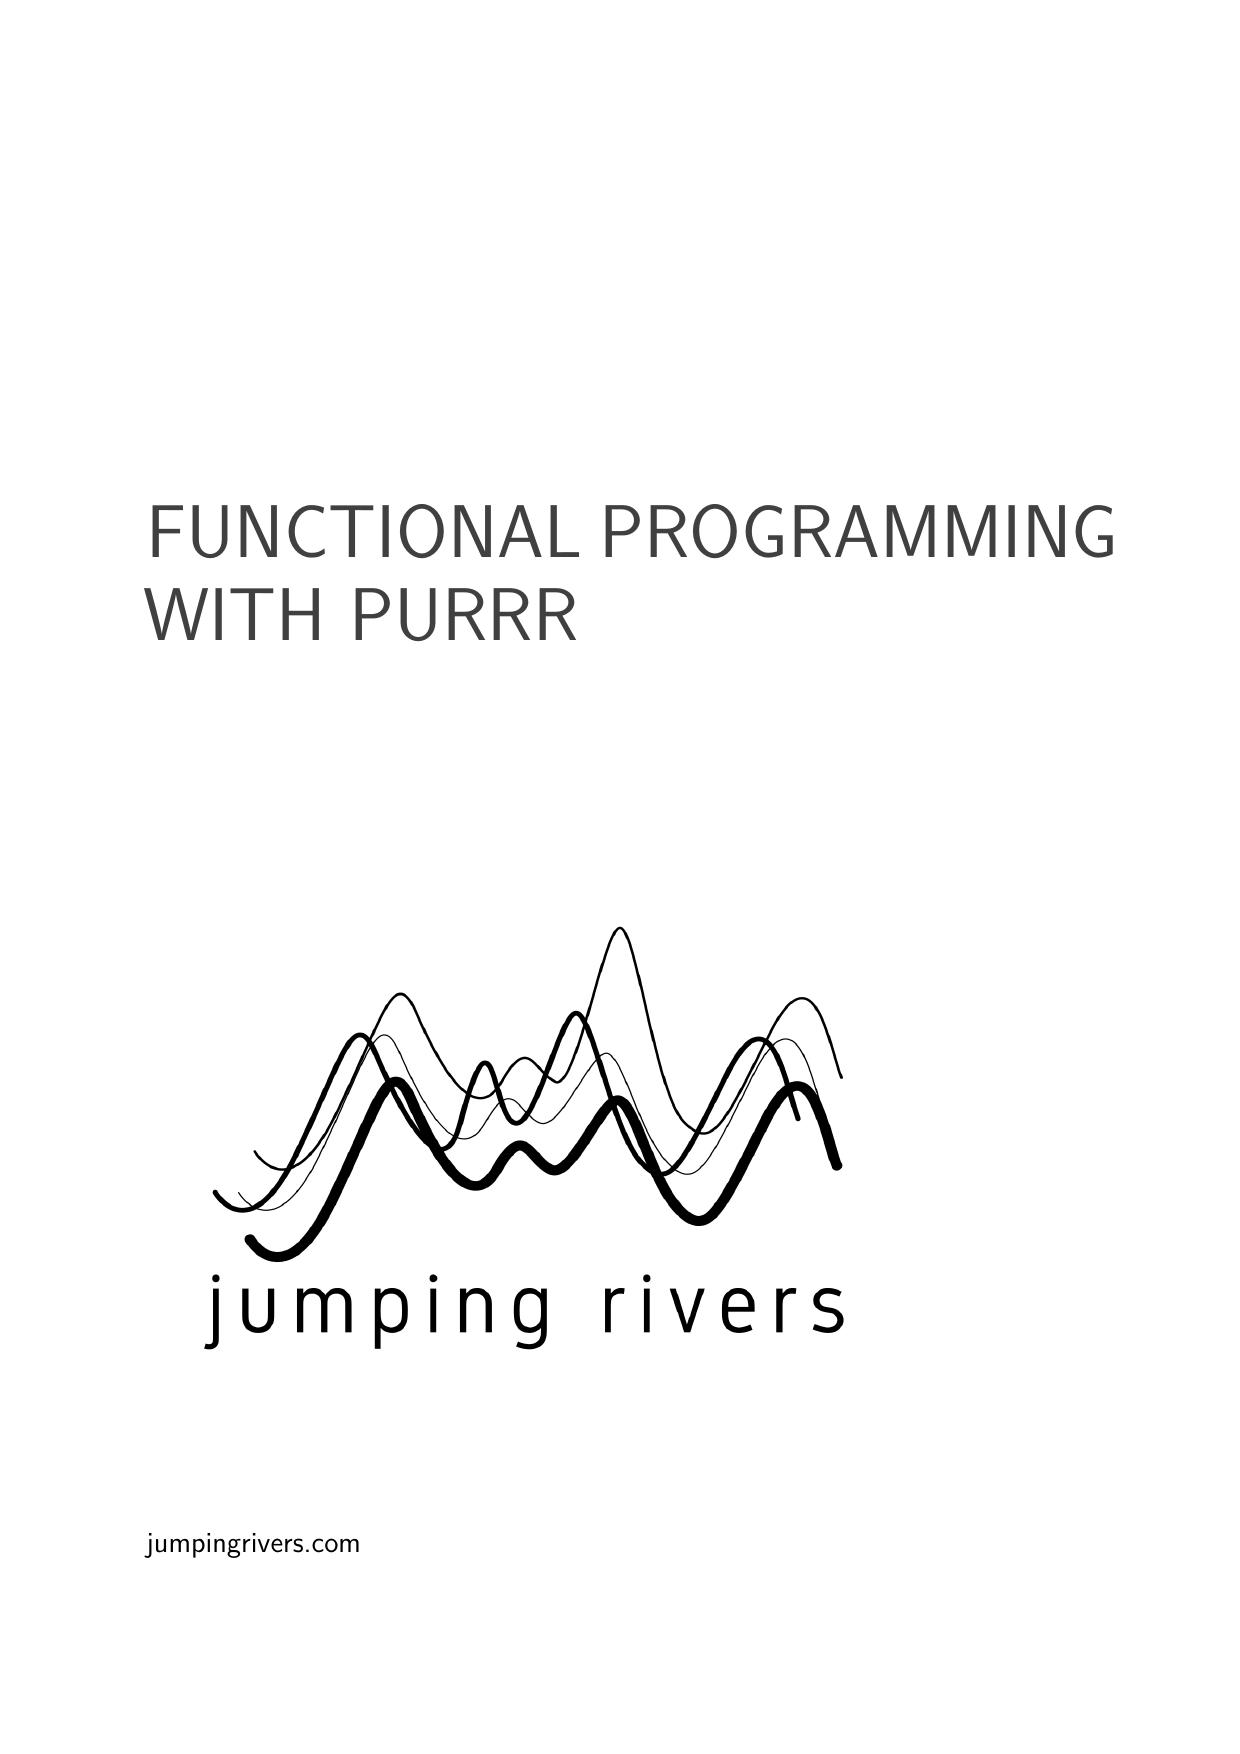 Example course material for 'Functional Programming with purrr